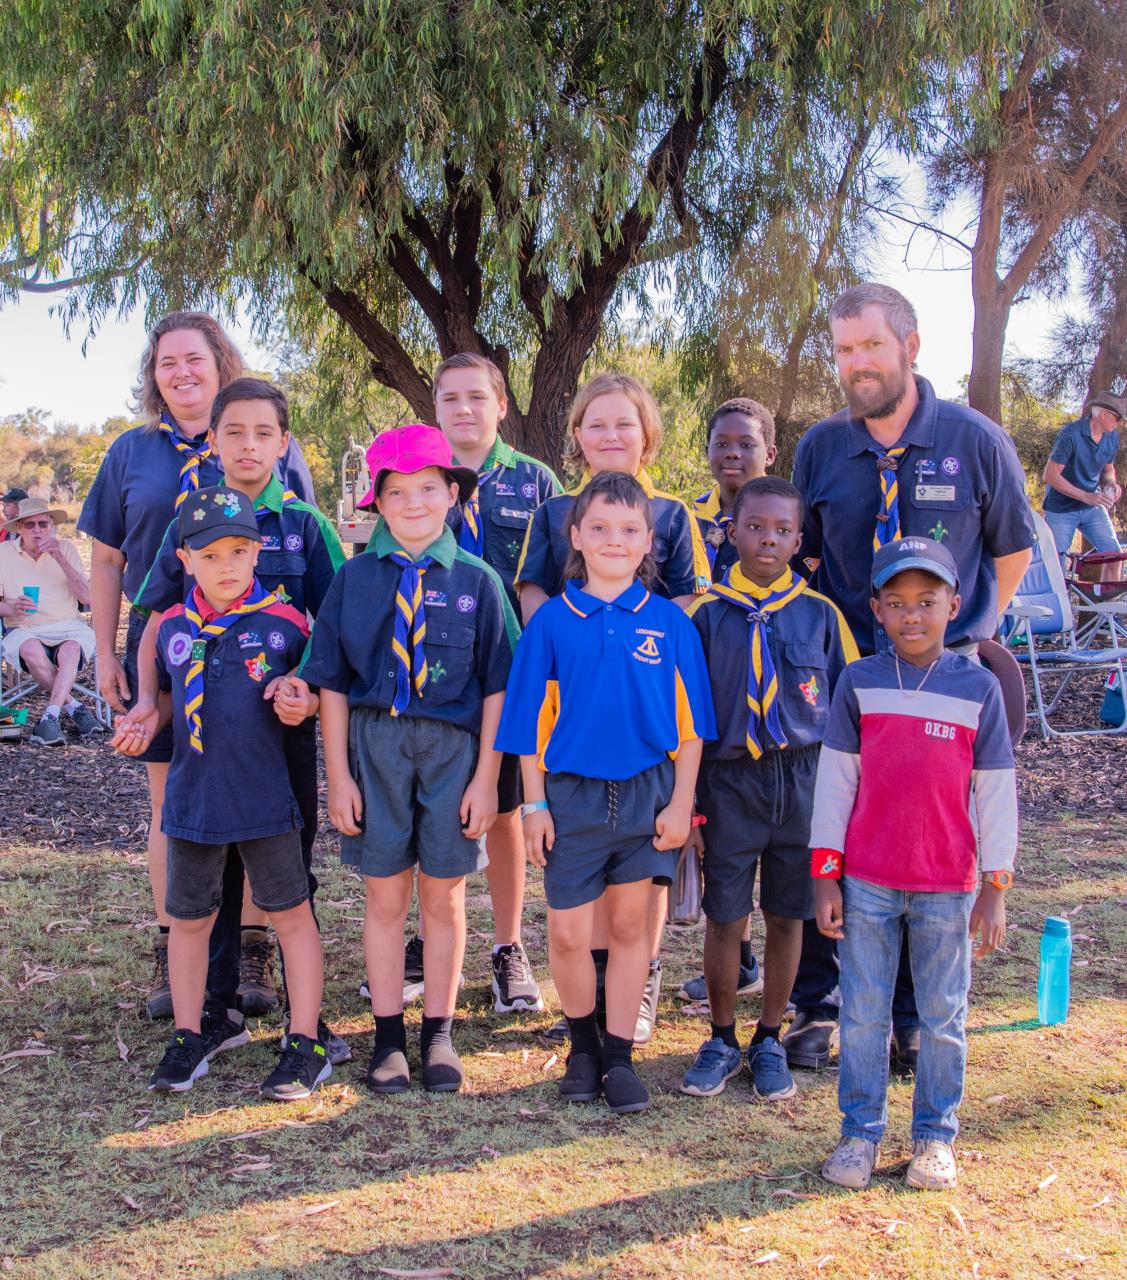 Photo caption: The Shire of Dardanup has opened Round 2 for the 2023/24 Community and Event Grants, which provide an opportunity for not-for-profit community groups and sporting clubs to secure financial support for their projects.